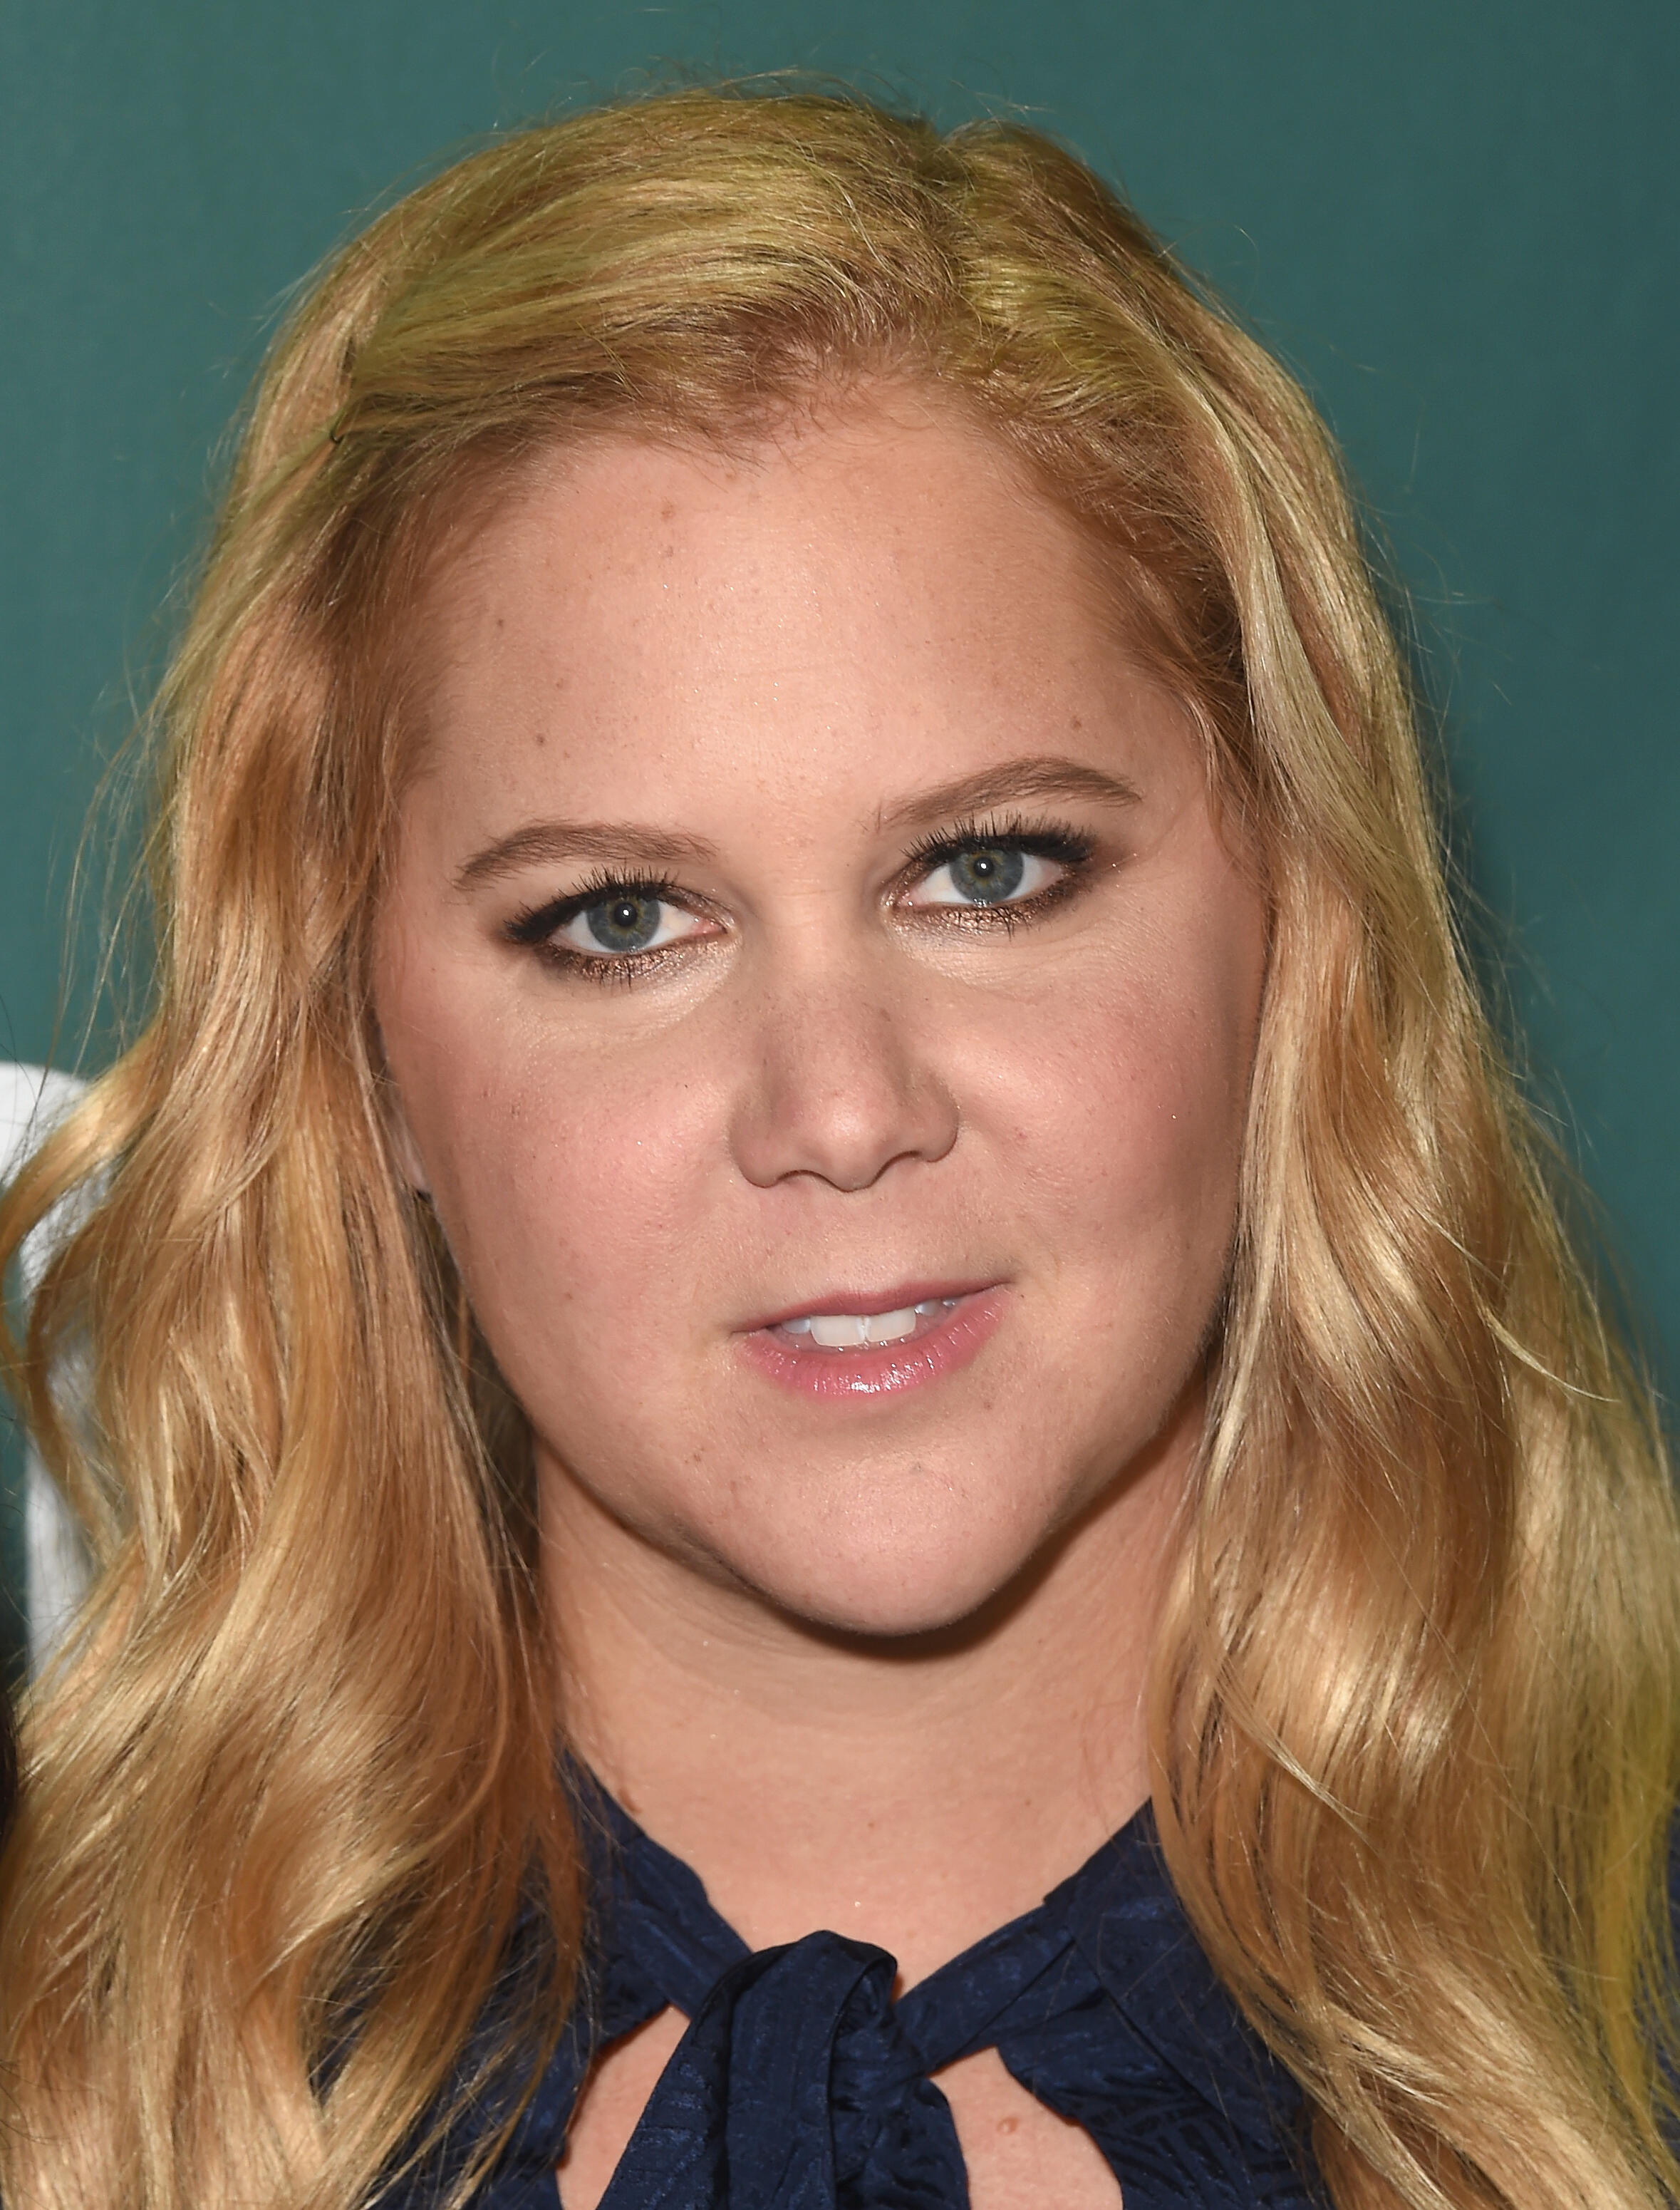 Amy Schumer has benefit Show for Charlottesville | Tiffany | Kiss 1082358 x 3101